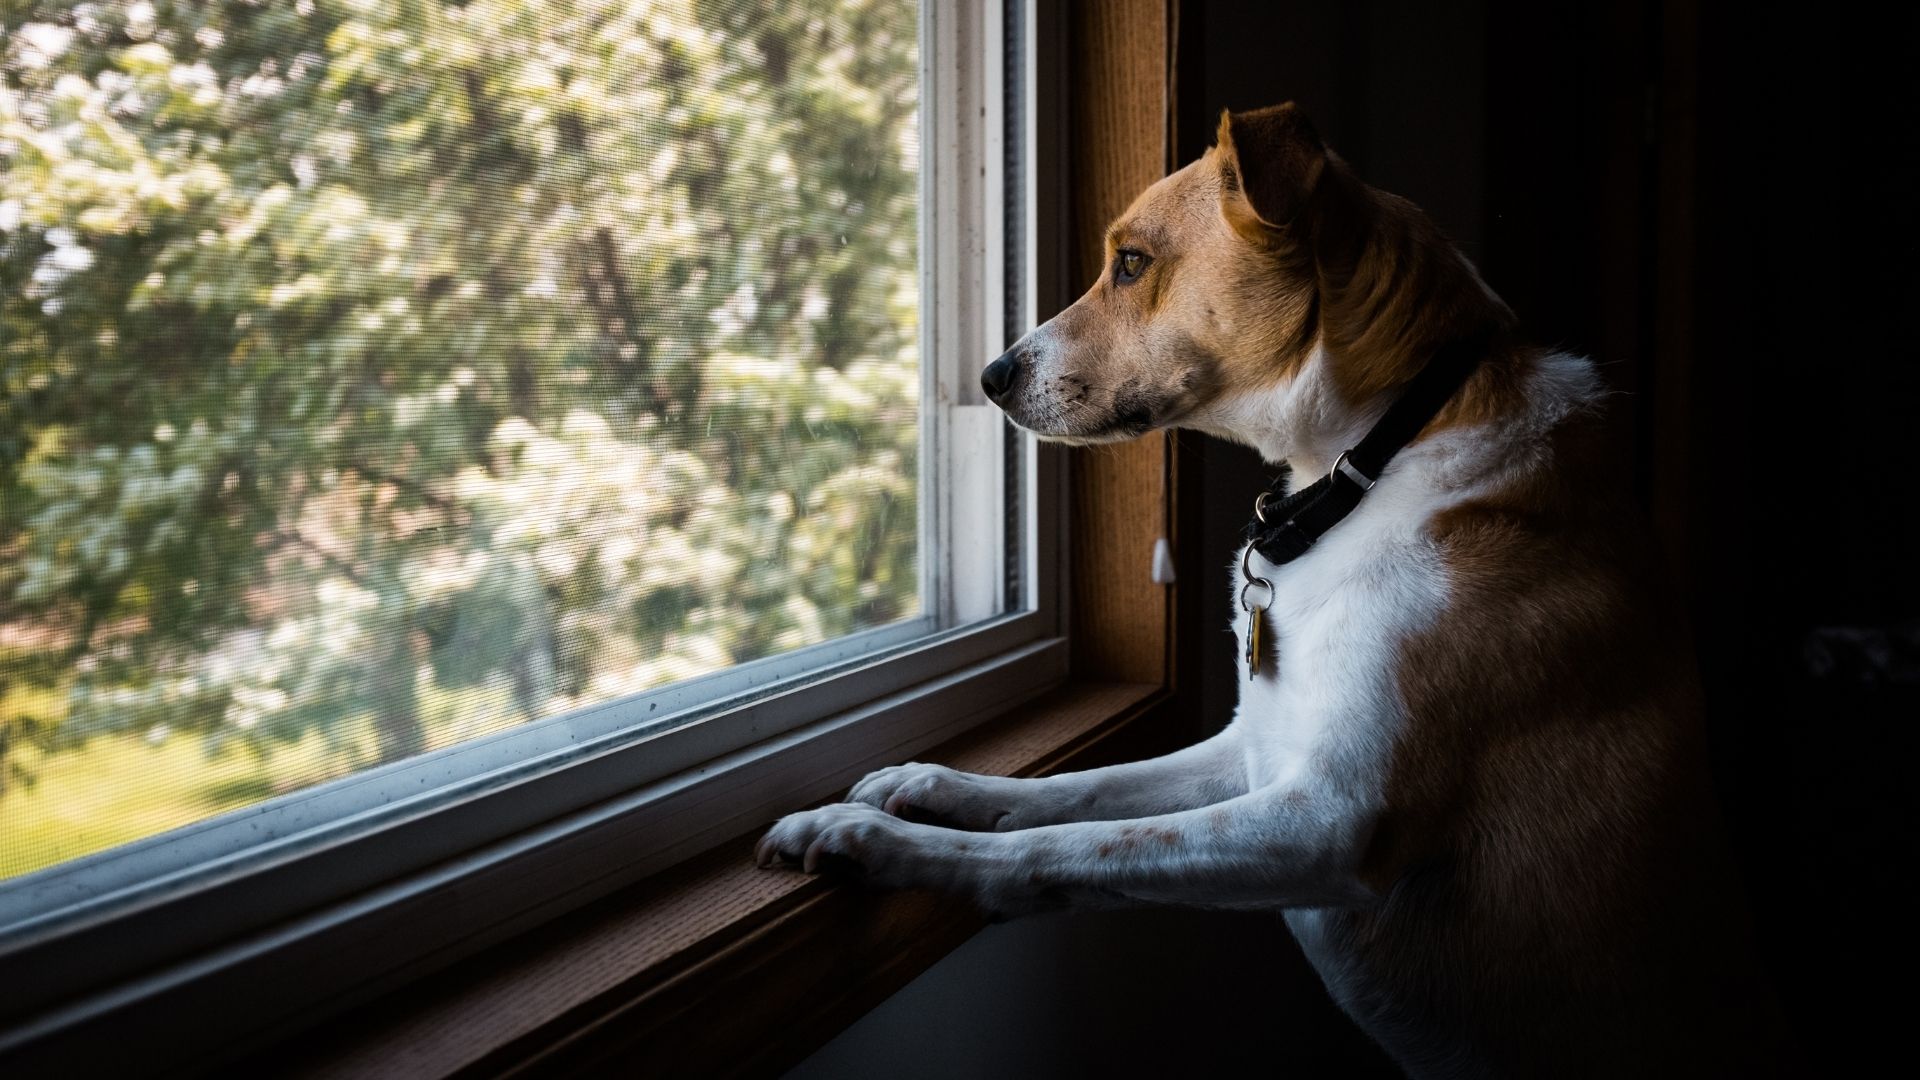 A dog waiting and looking out of the window